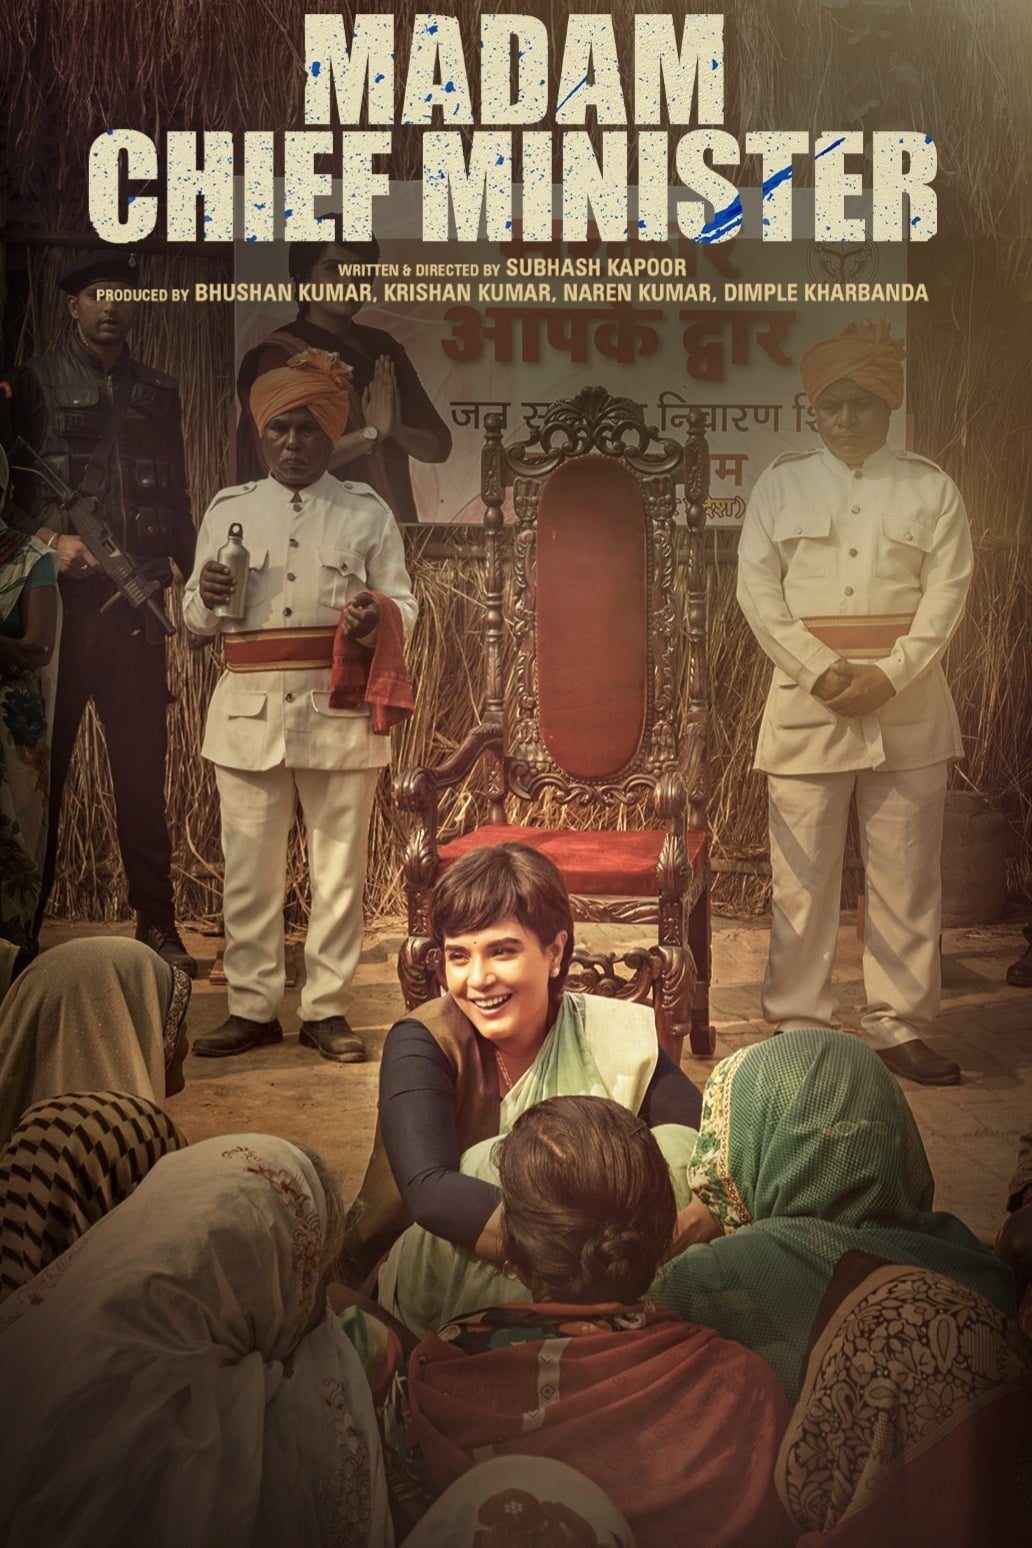 Poster for the movie "Madam Chief Minister"